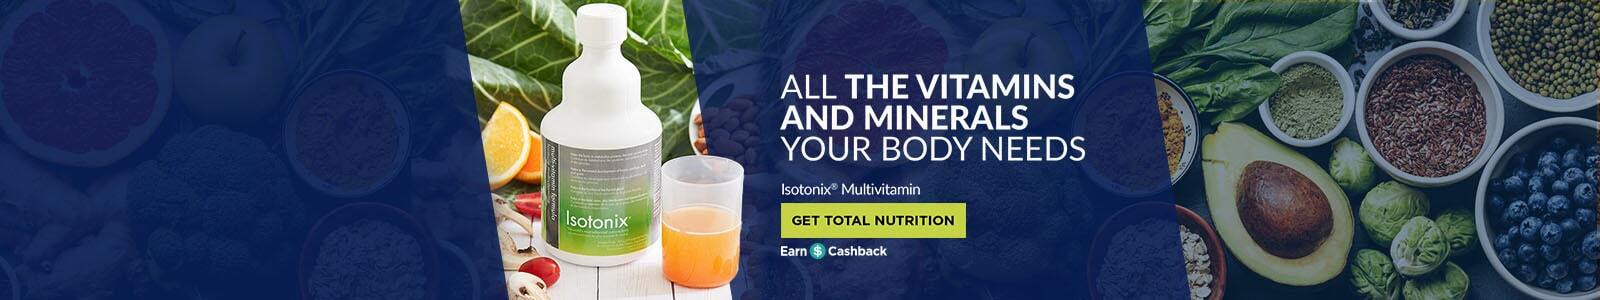 Isotonix Multivitamin Support your Immune System with Essential Vitamins and Minerals Shop Now The Rare Beauty of Authentic Gems Buy Now